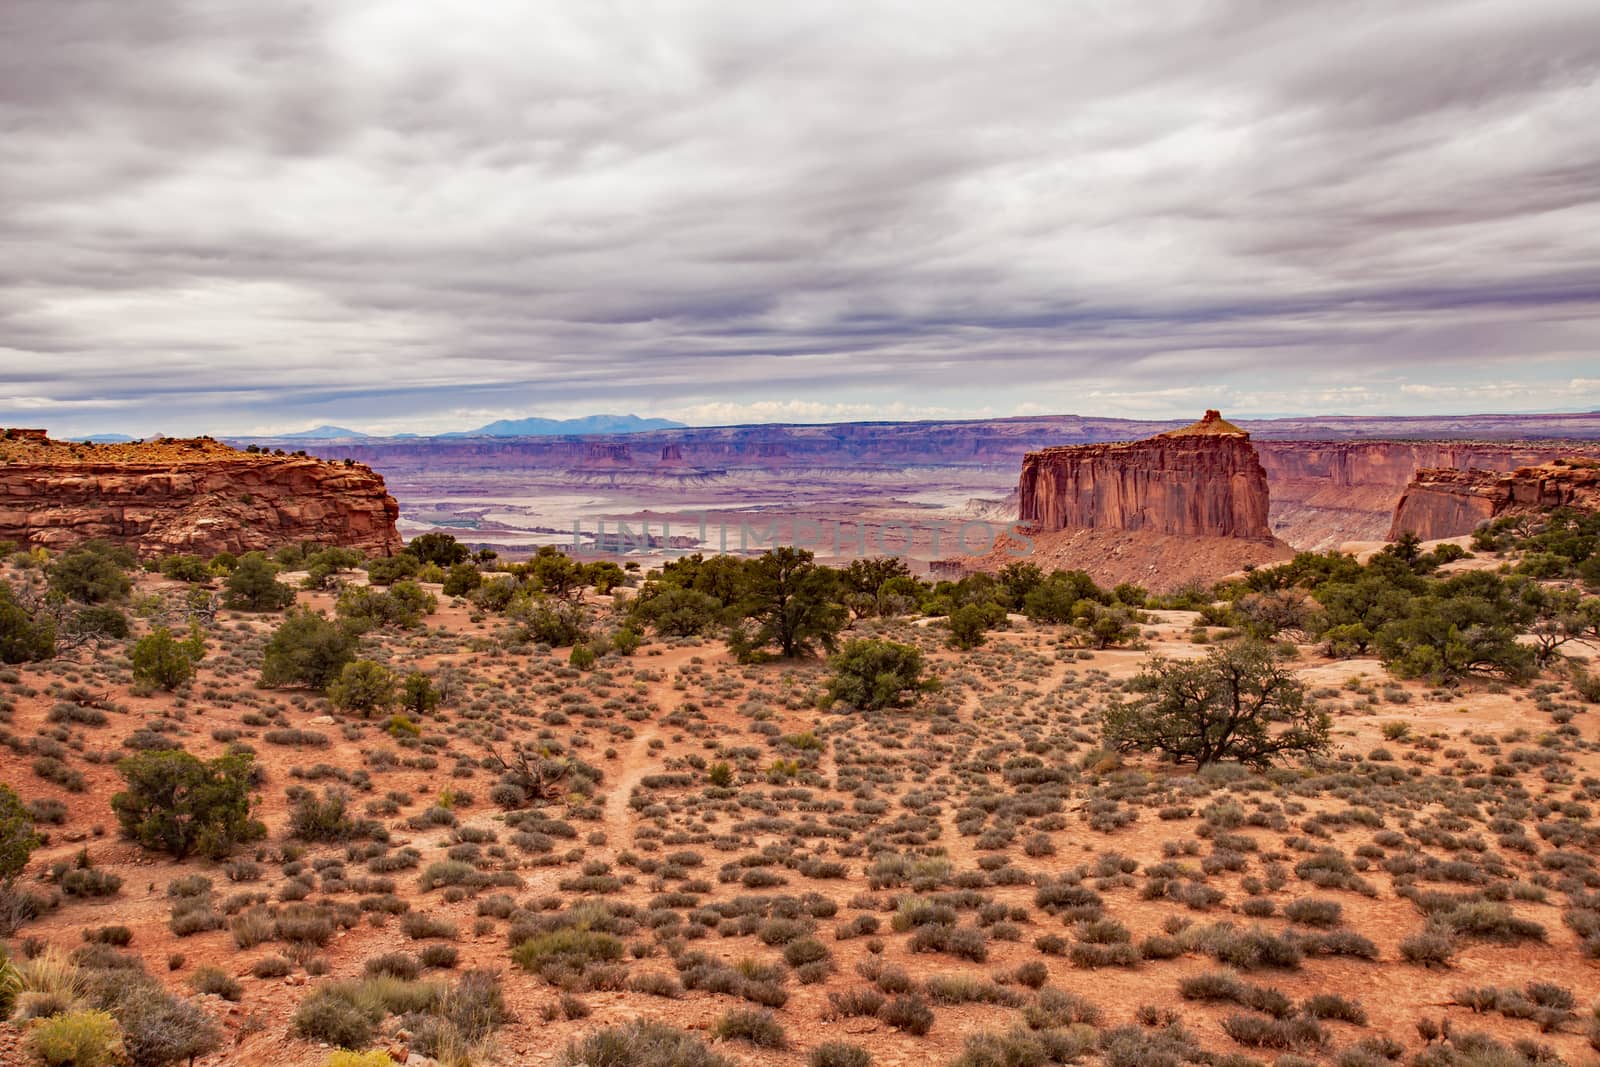 View over the Green River Valley from the Canyonlands National Park, Utah. United States of America.